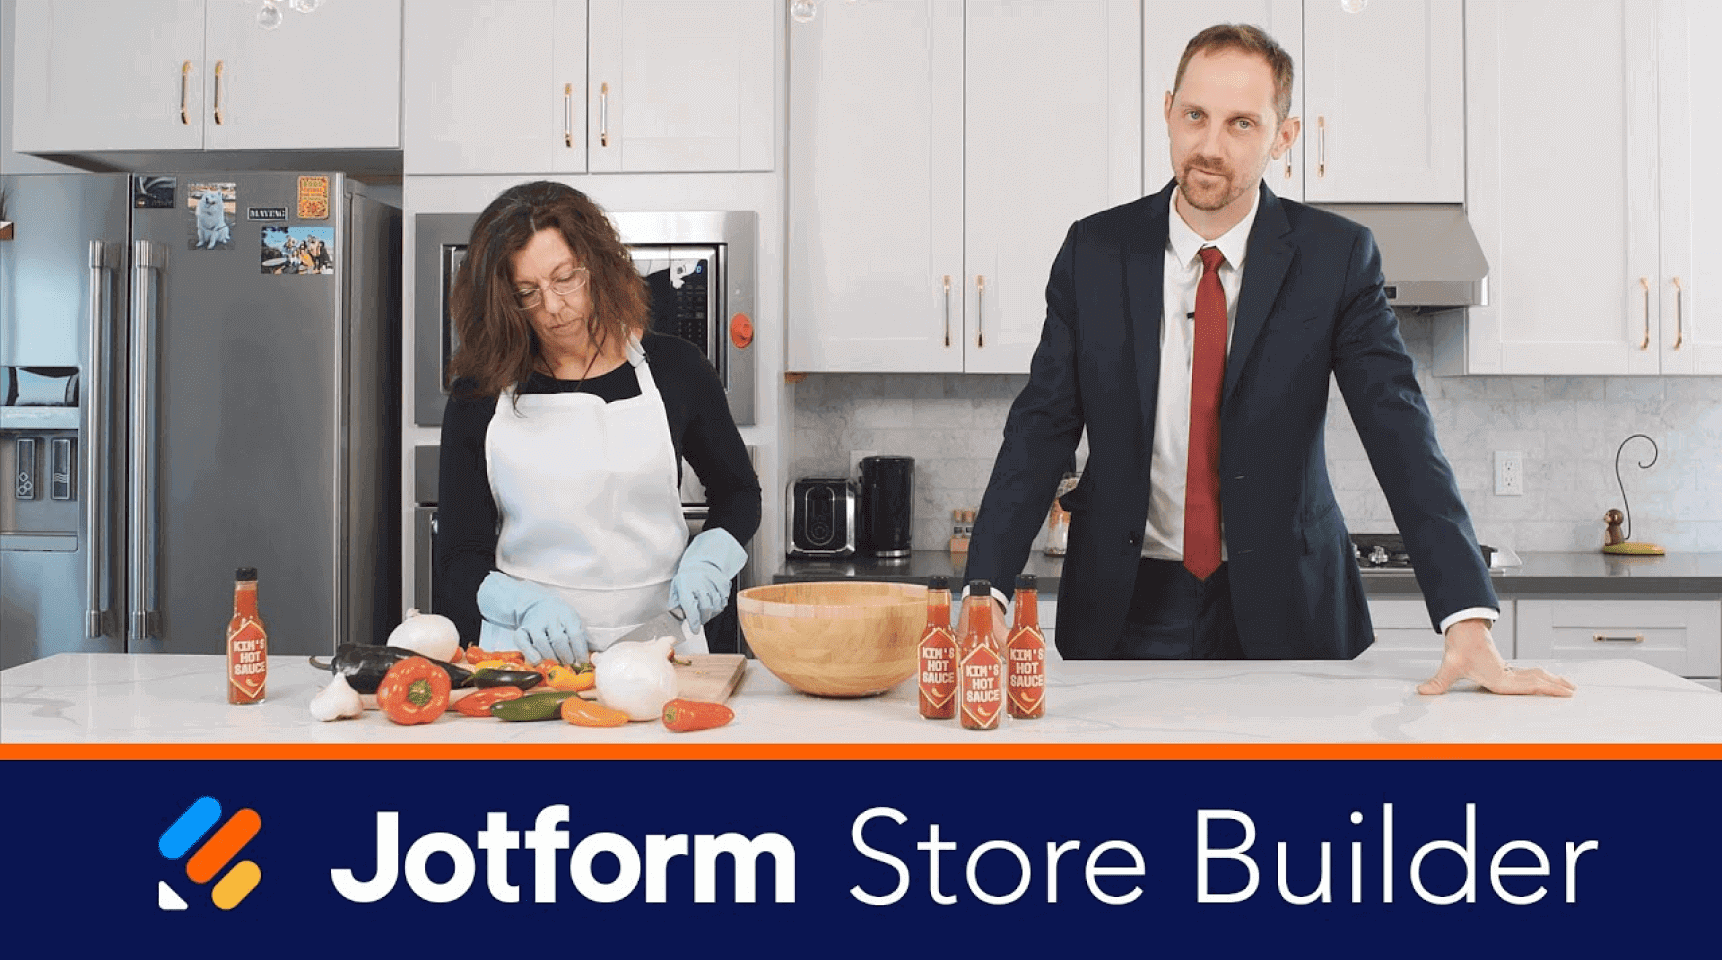 Announcing Jotform Store Builder: Create an Online Store with No Coding